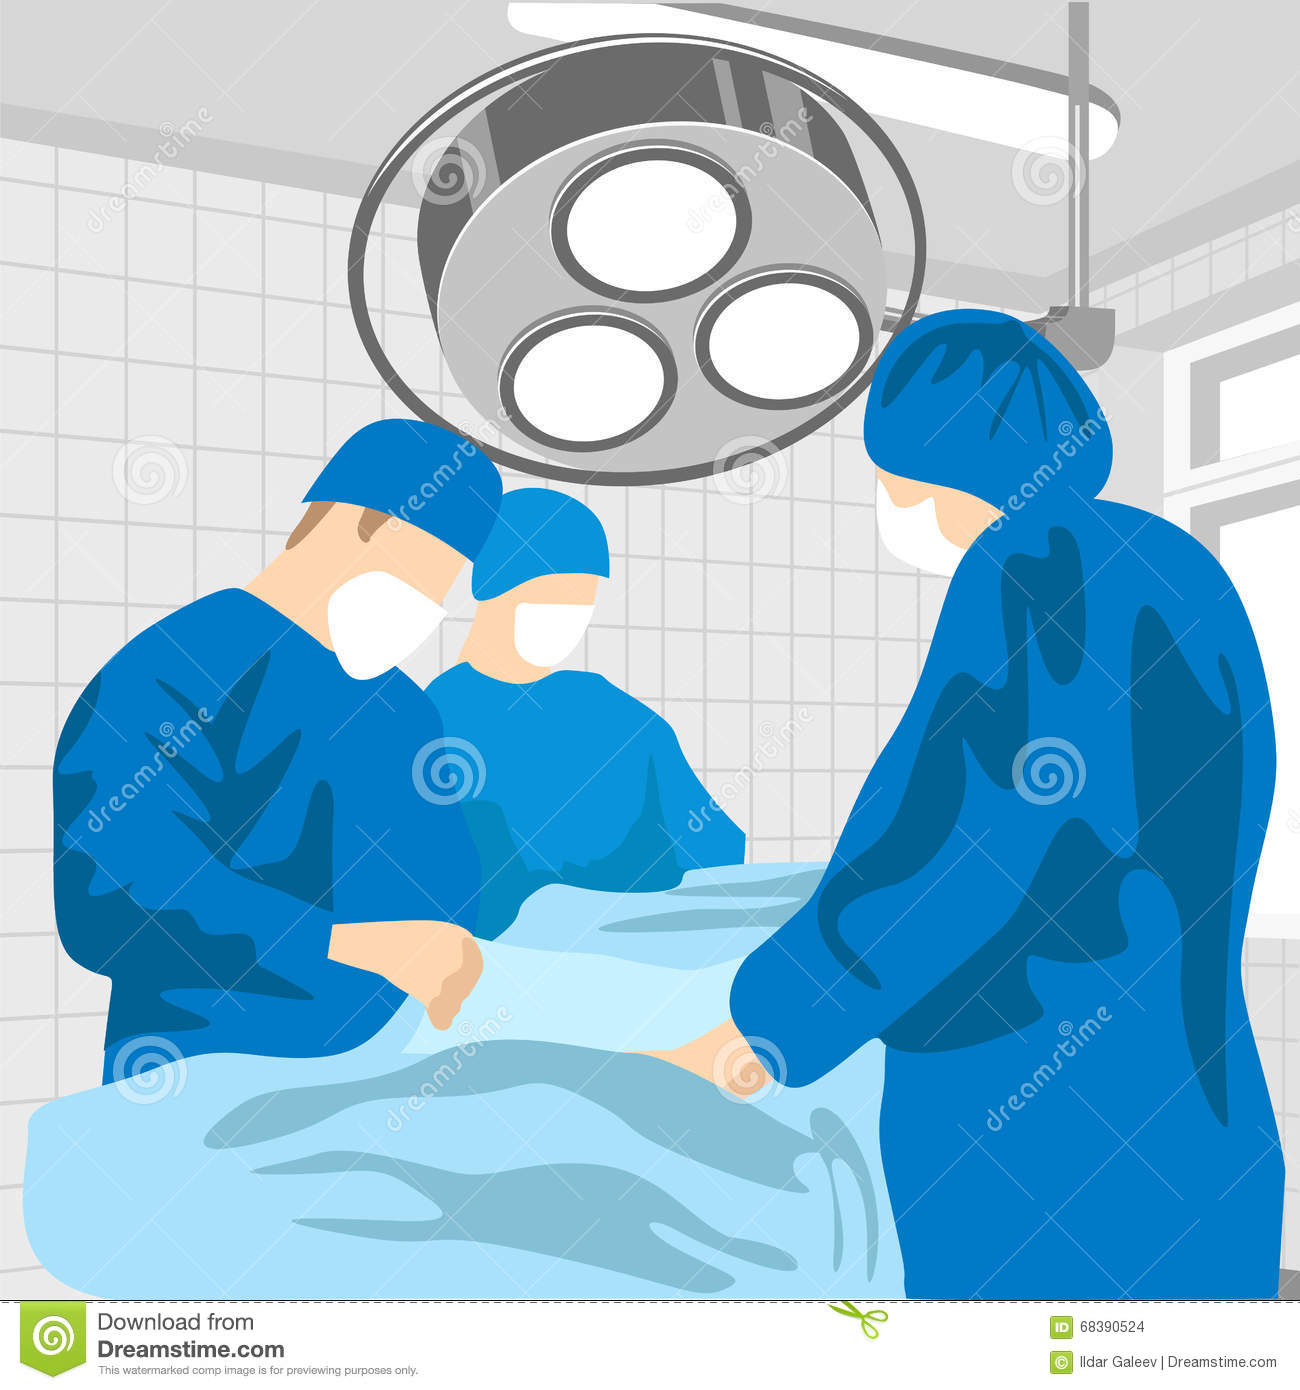 operating room clipart - photo #18